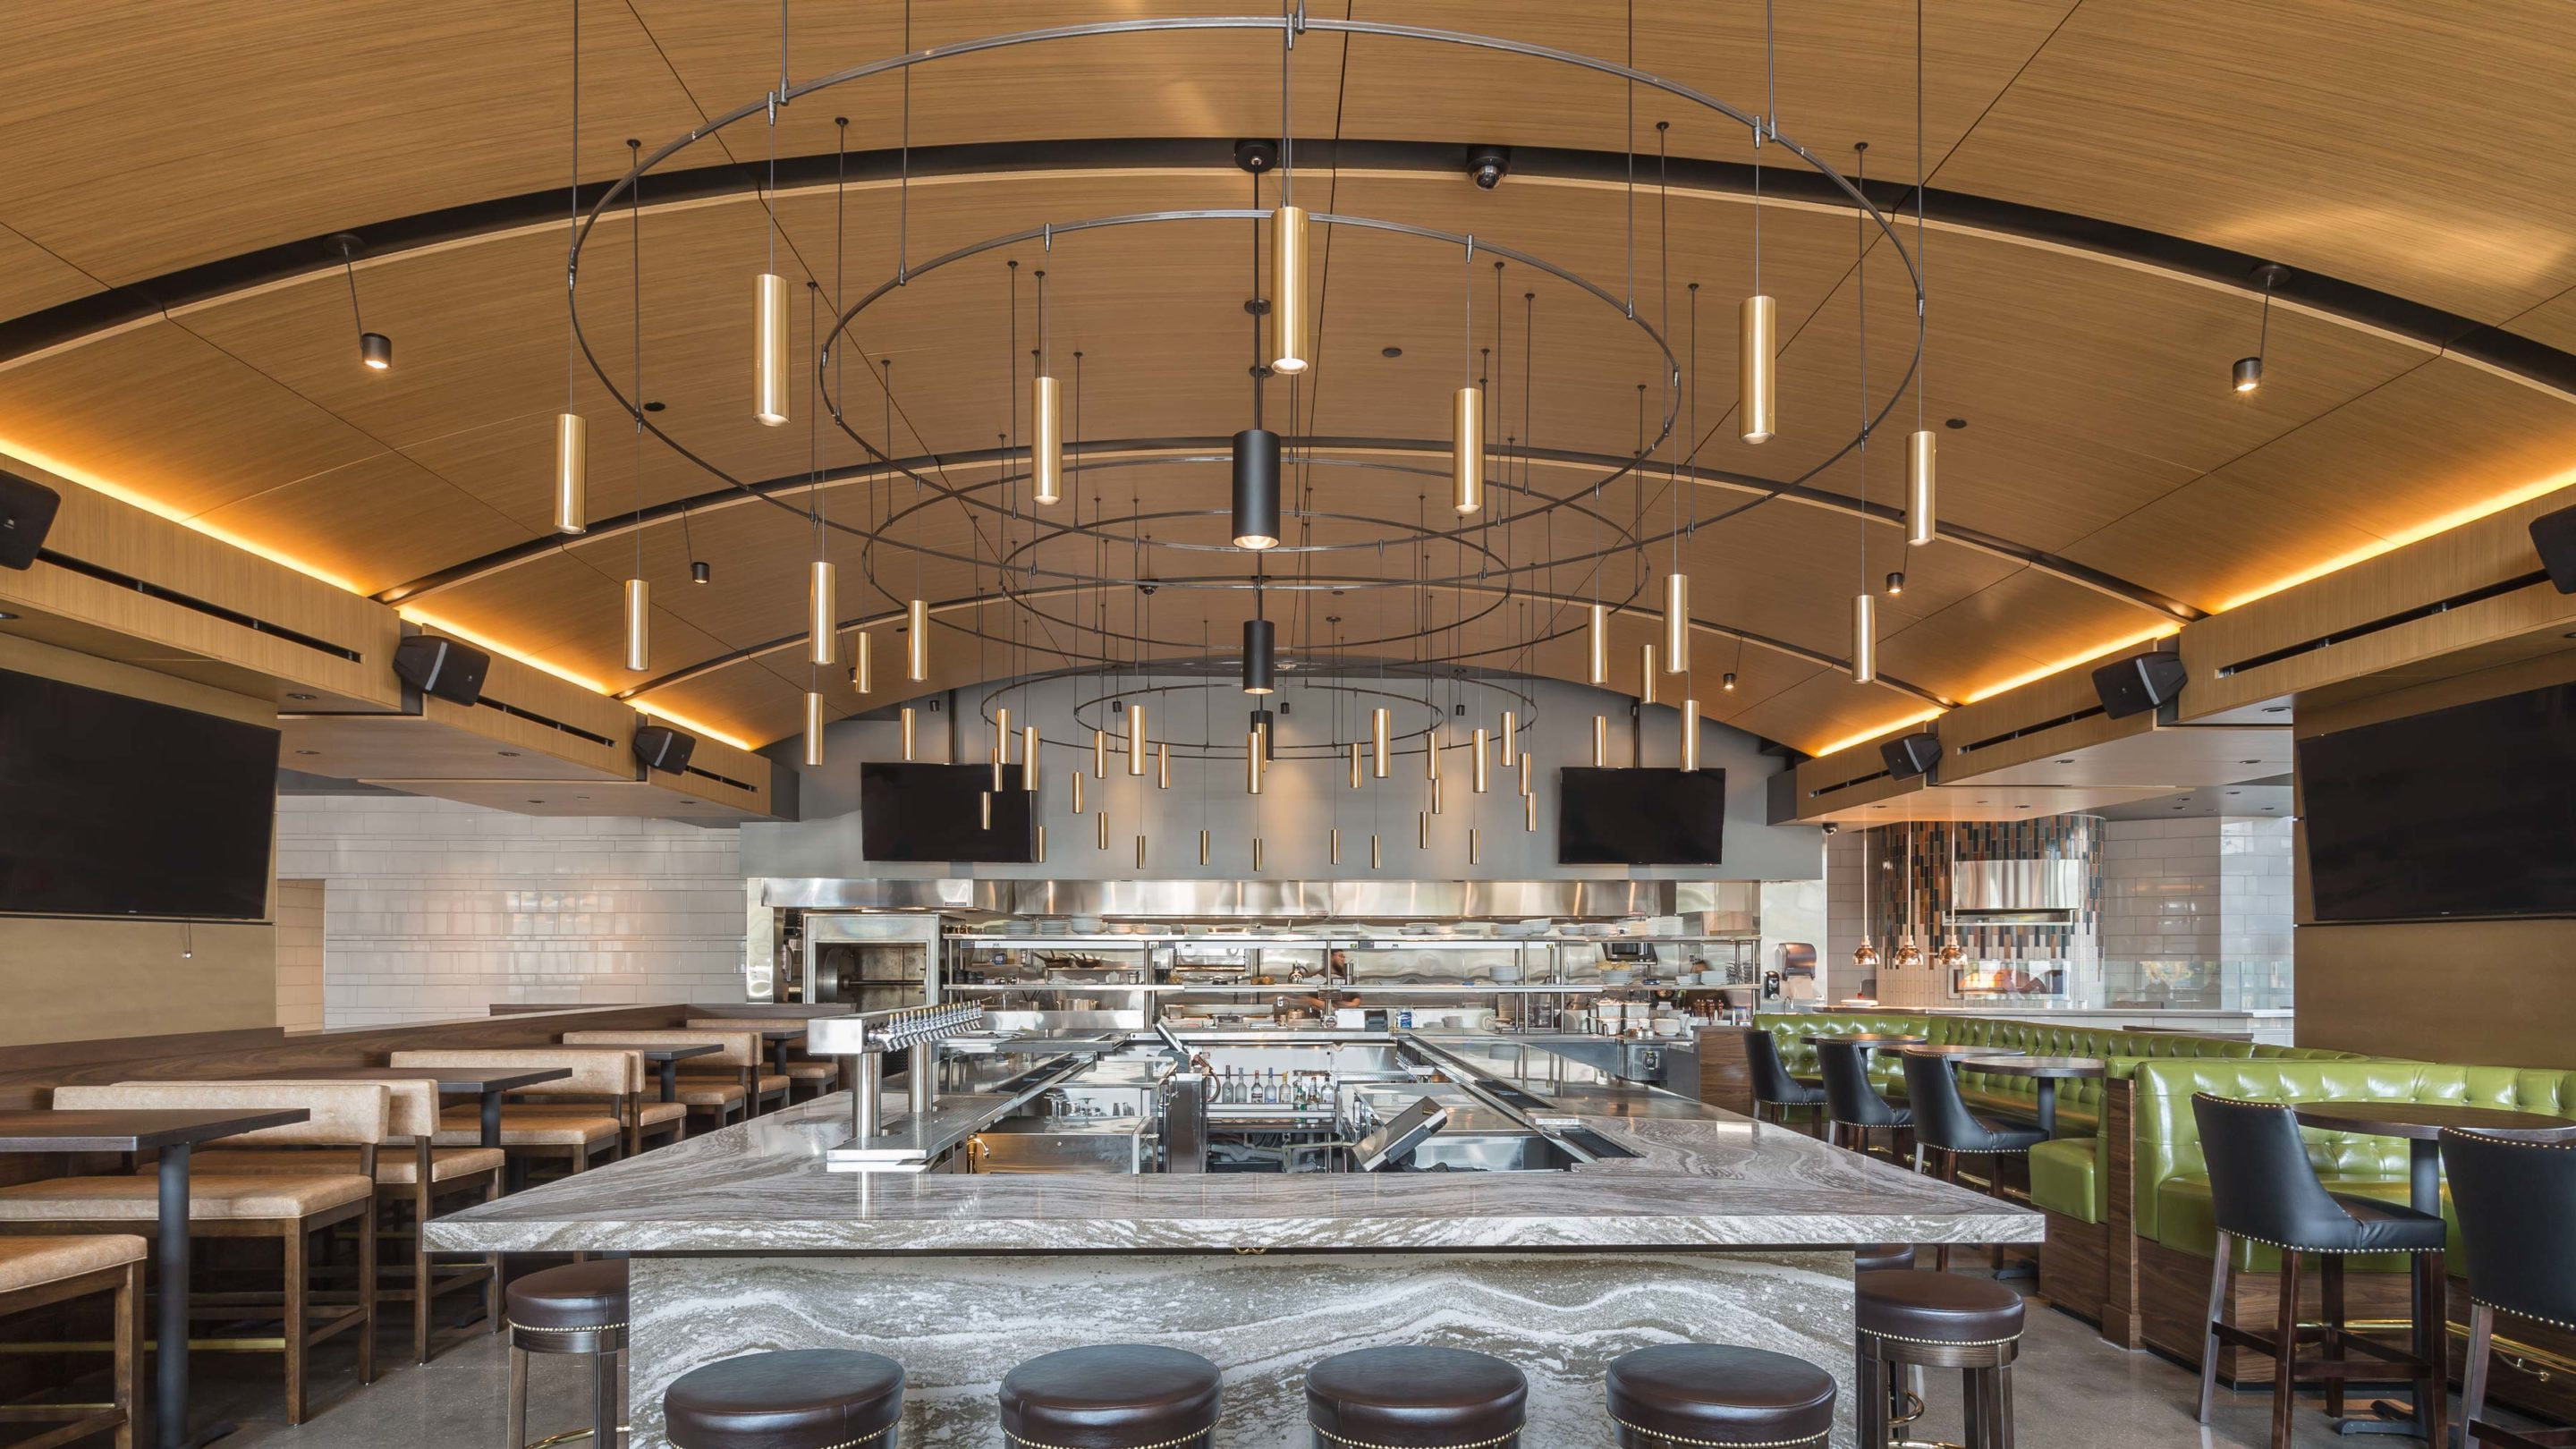 Hazelwood Food + Drink features SoundPly's Curved Acoustic Ceiling Panels.